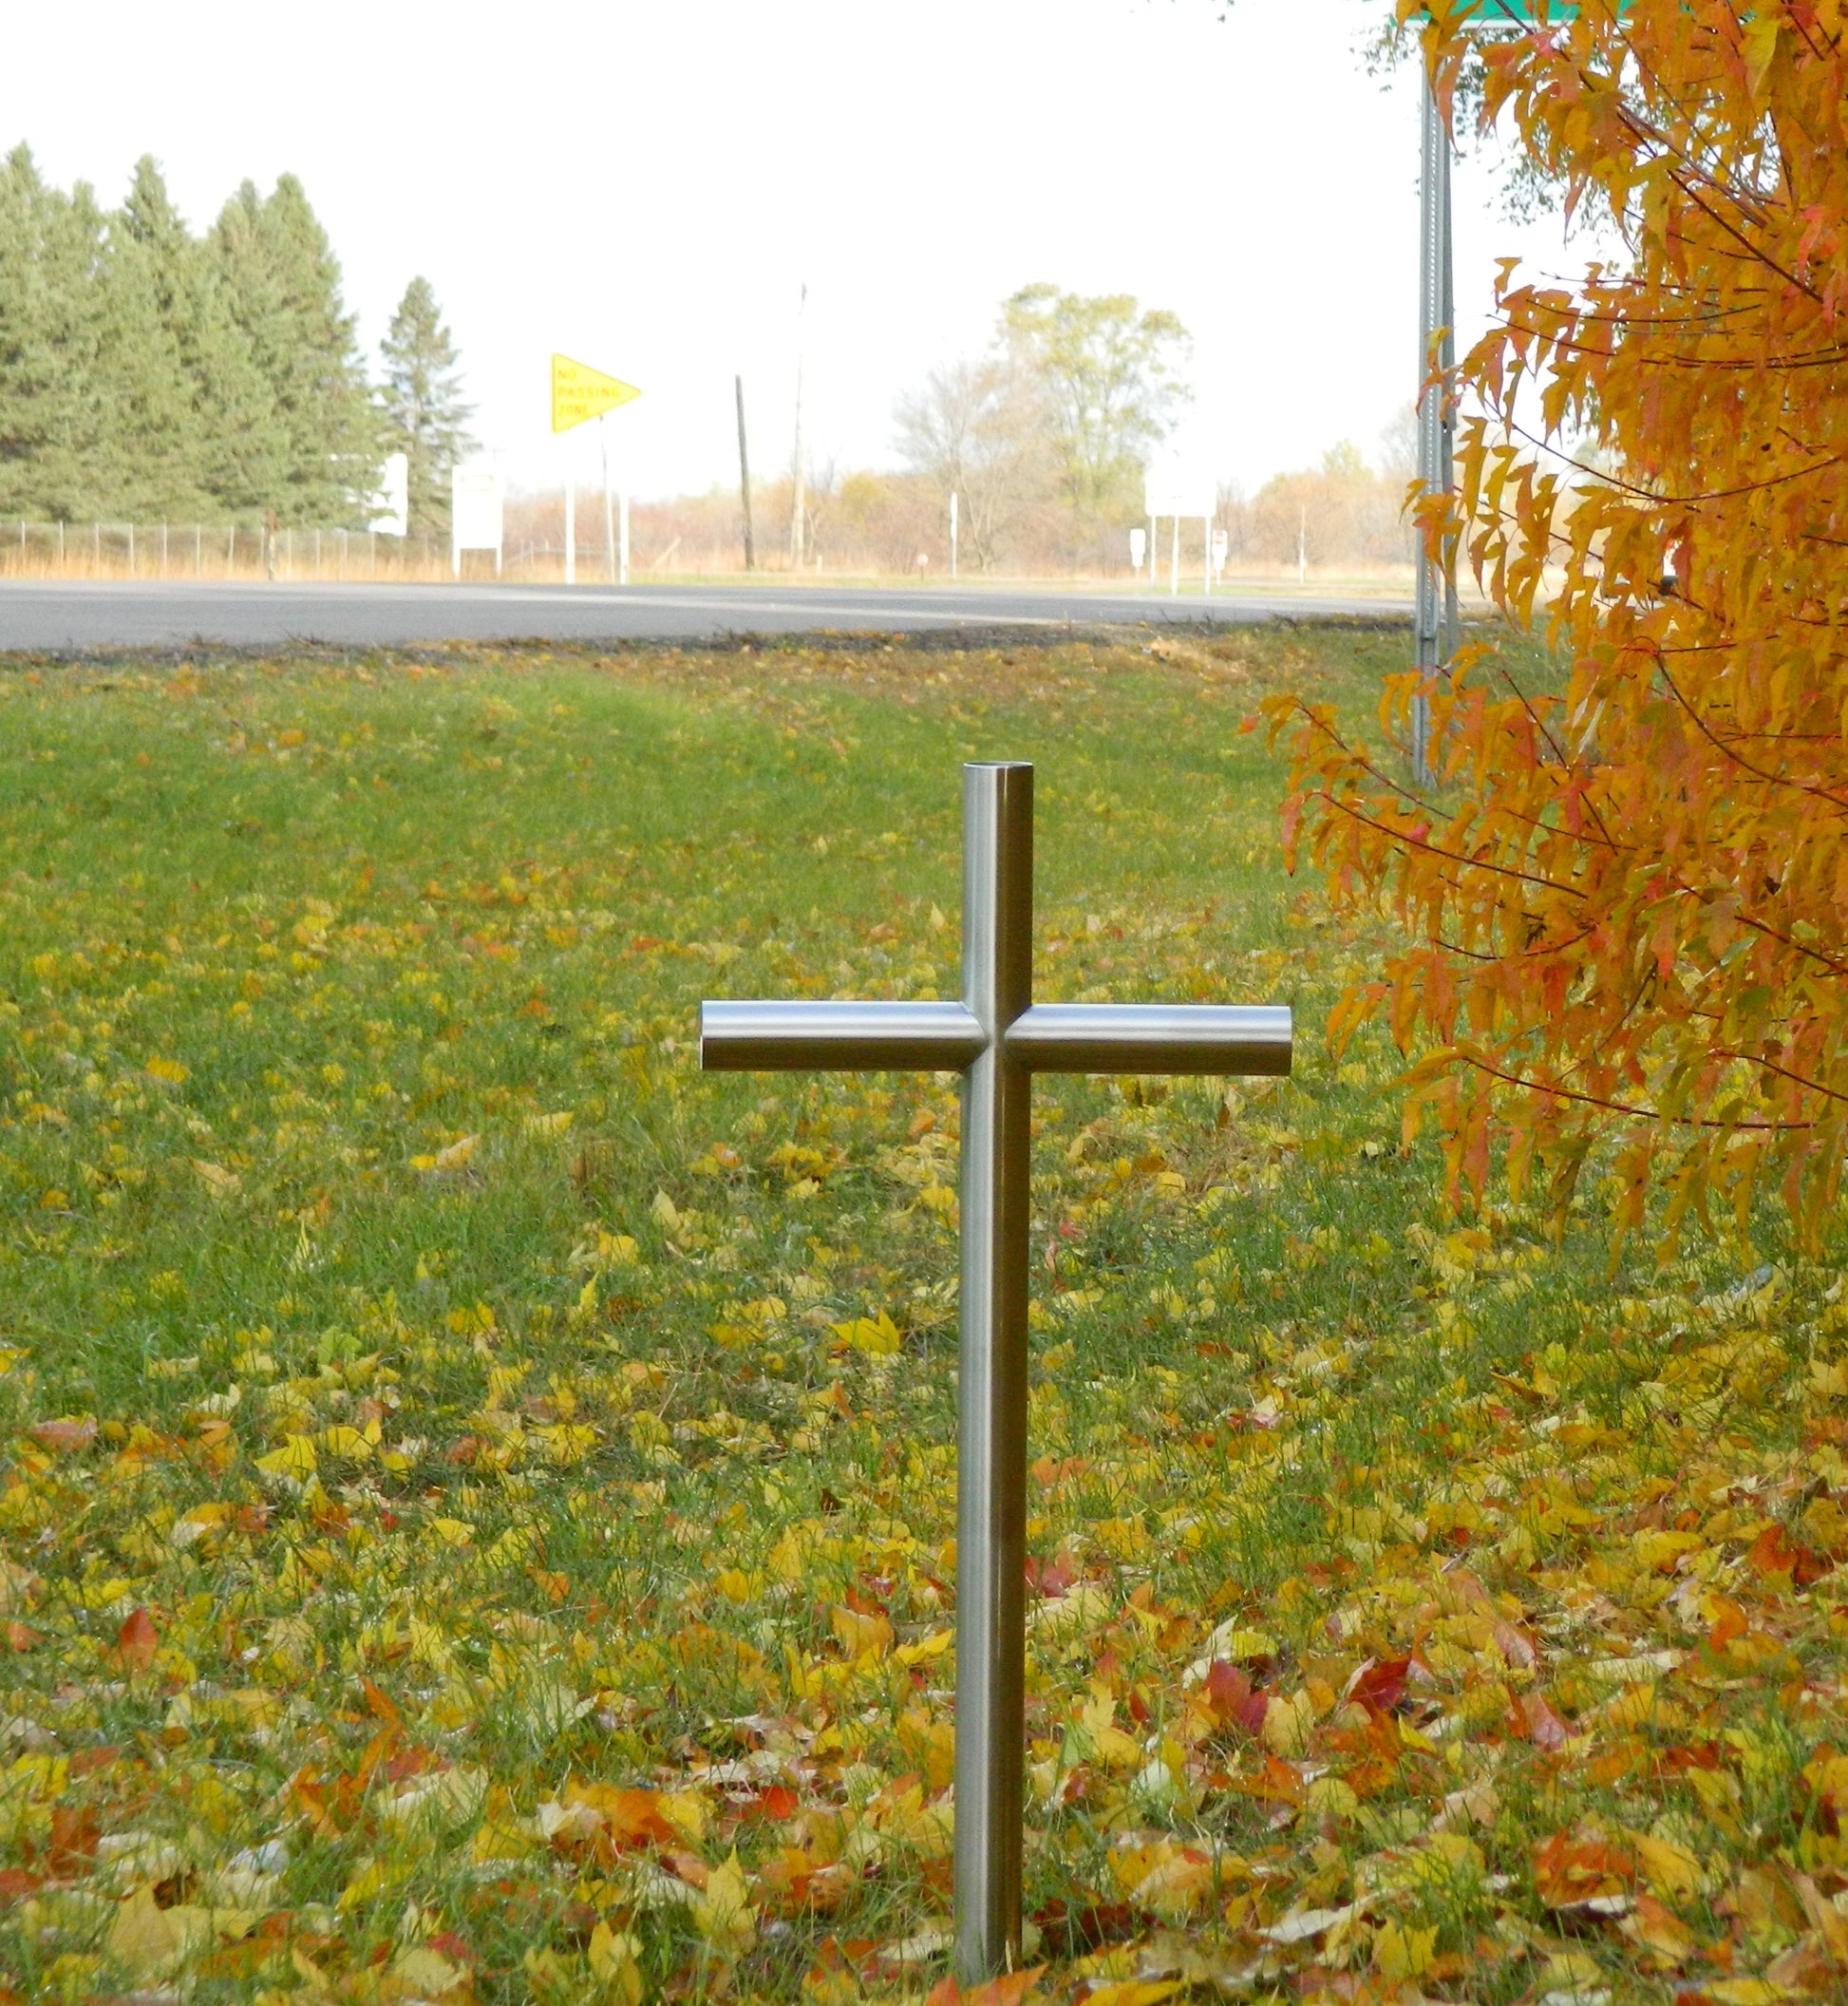 Everlasting Cross Roadside Memorial Is Timeless. Manufactured of 304 Stainless Steel Will Be Forever Lasting Like Your Memories and Love of Your Loved One Loss. Uniquely Engraved and Forever Preserved Urn to Remember Them